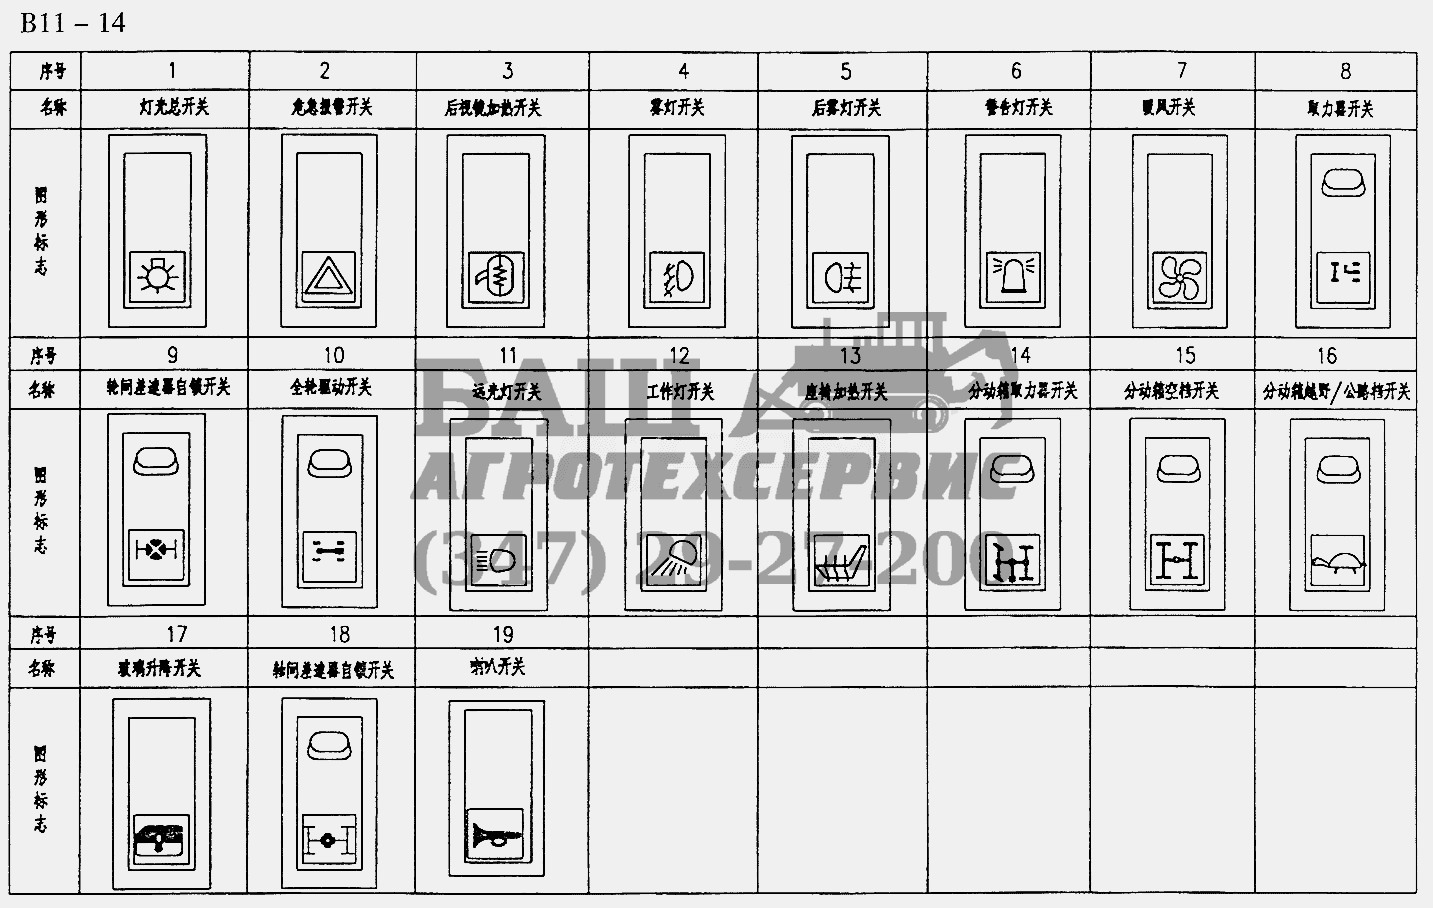 SWITCHS FOR 7001 TYPE ELECTRICAL SYSTEM (B11-14) Sinotruk 6x4 Tractor (371)